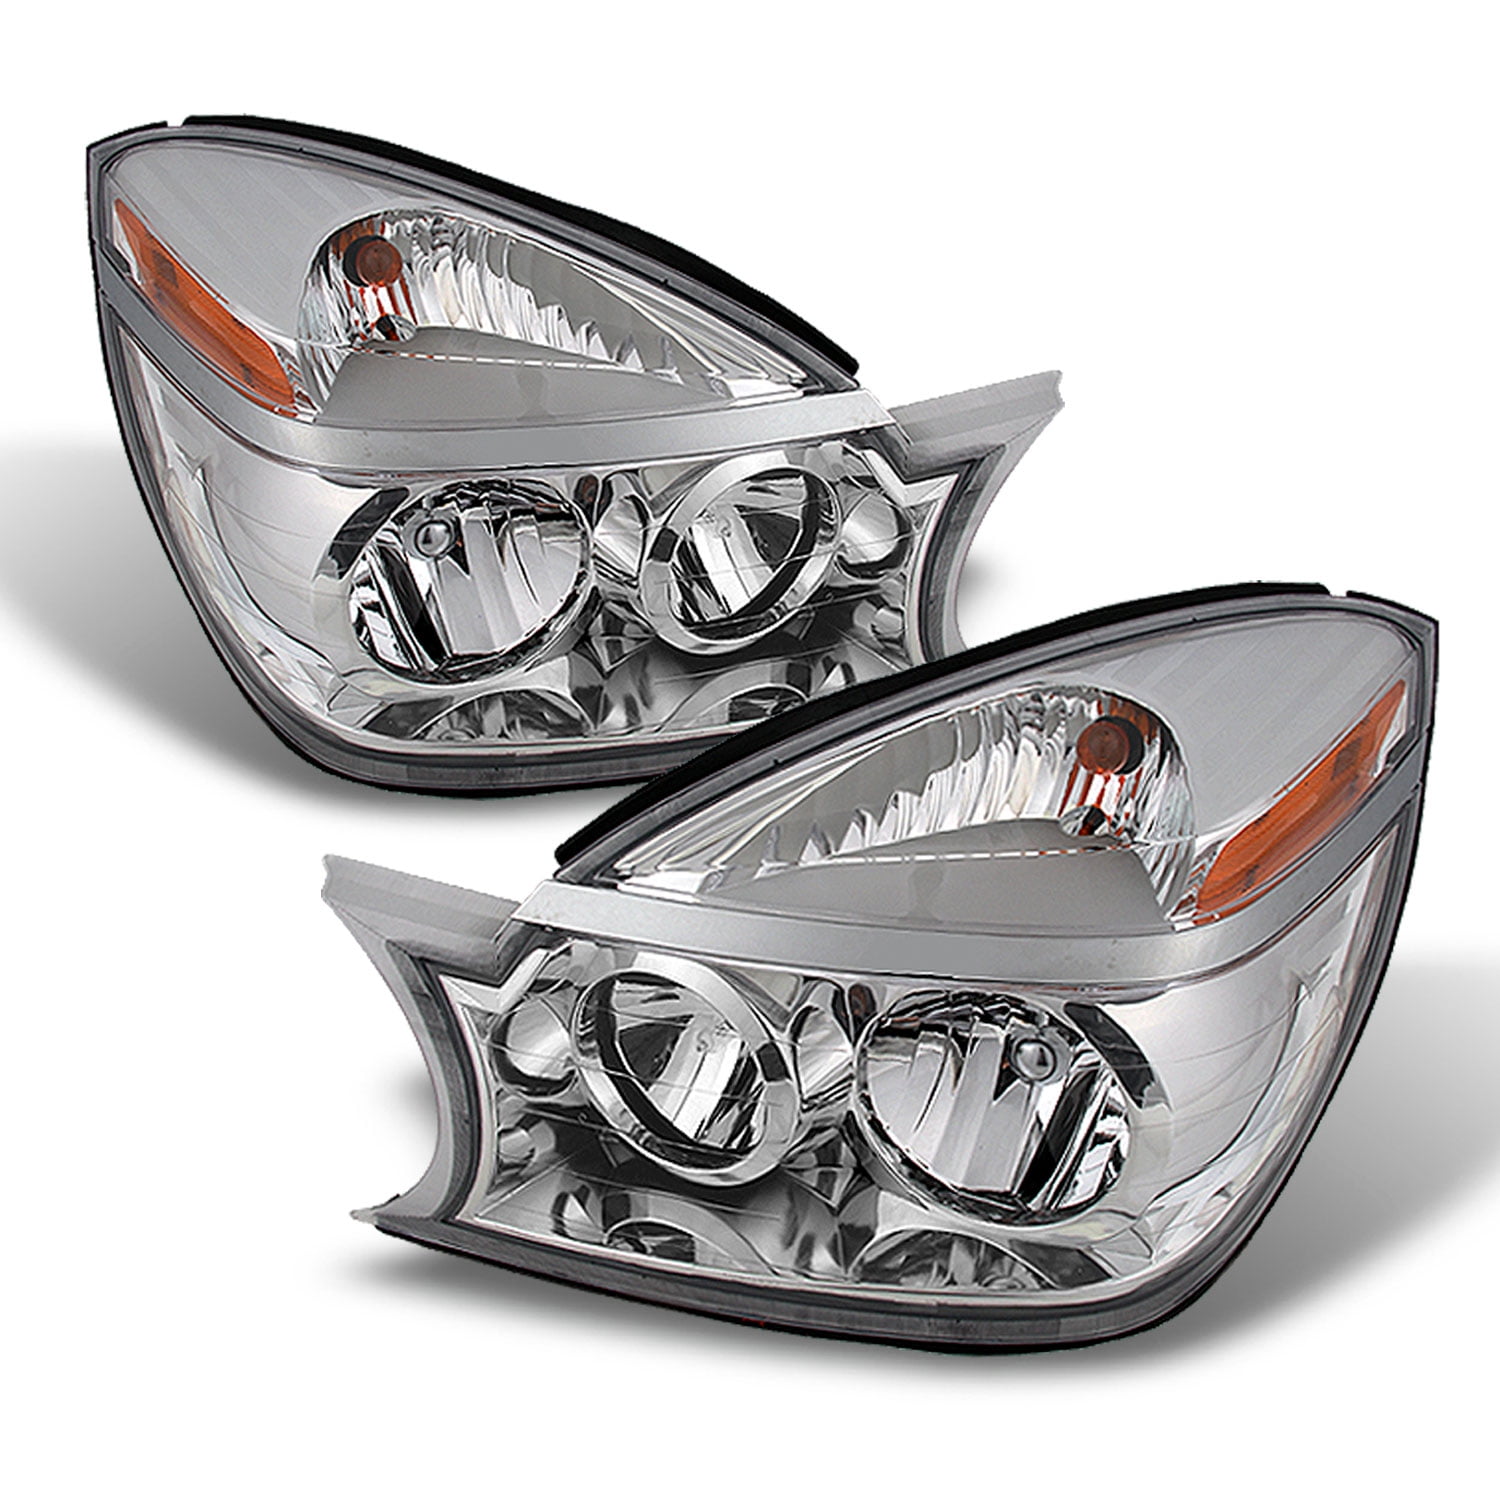 Fit 2002-2007 Buick Rendezvous Headlights Headlamps L+R Replacement 2004 2005